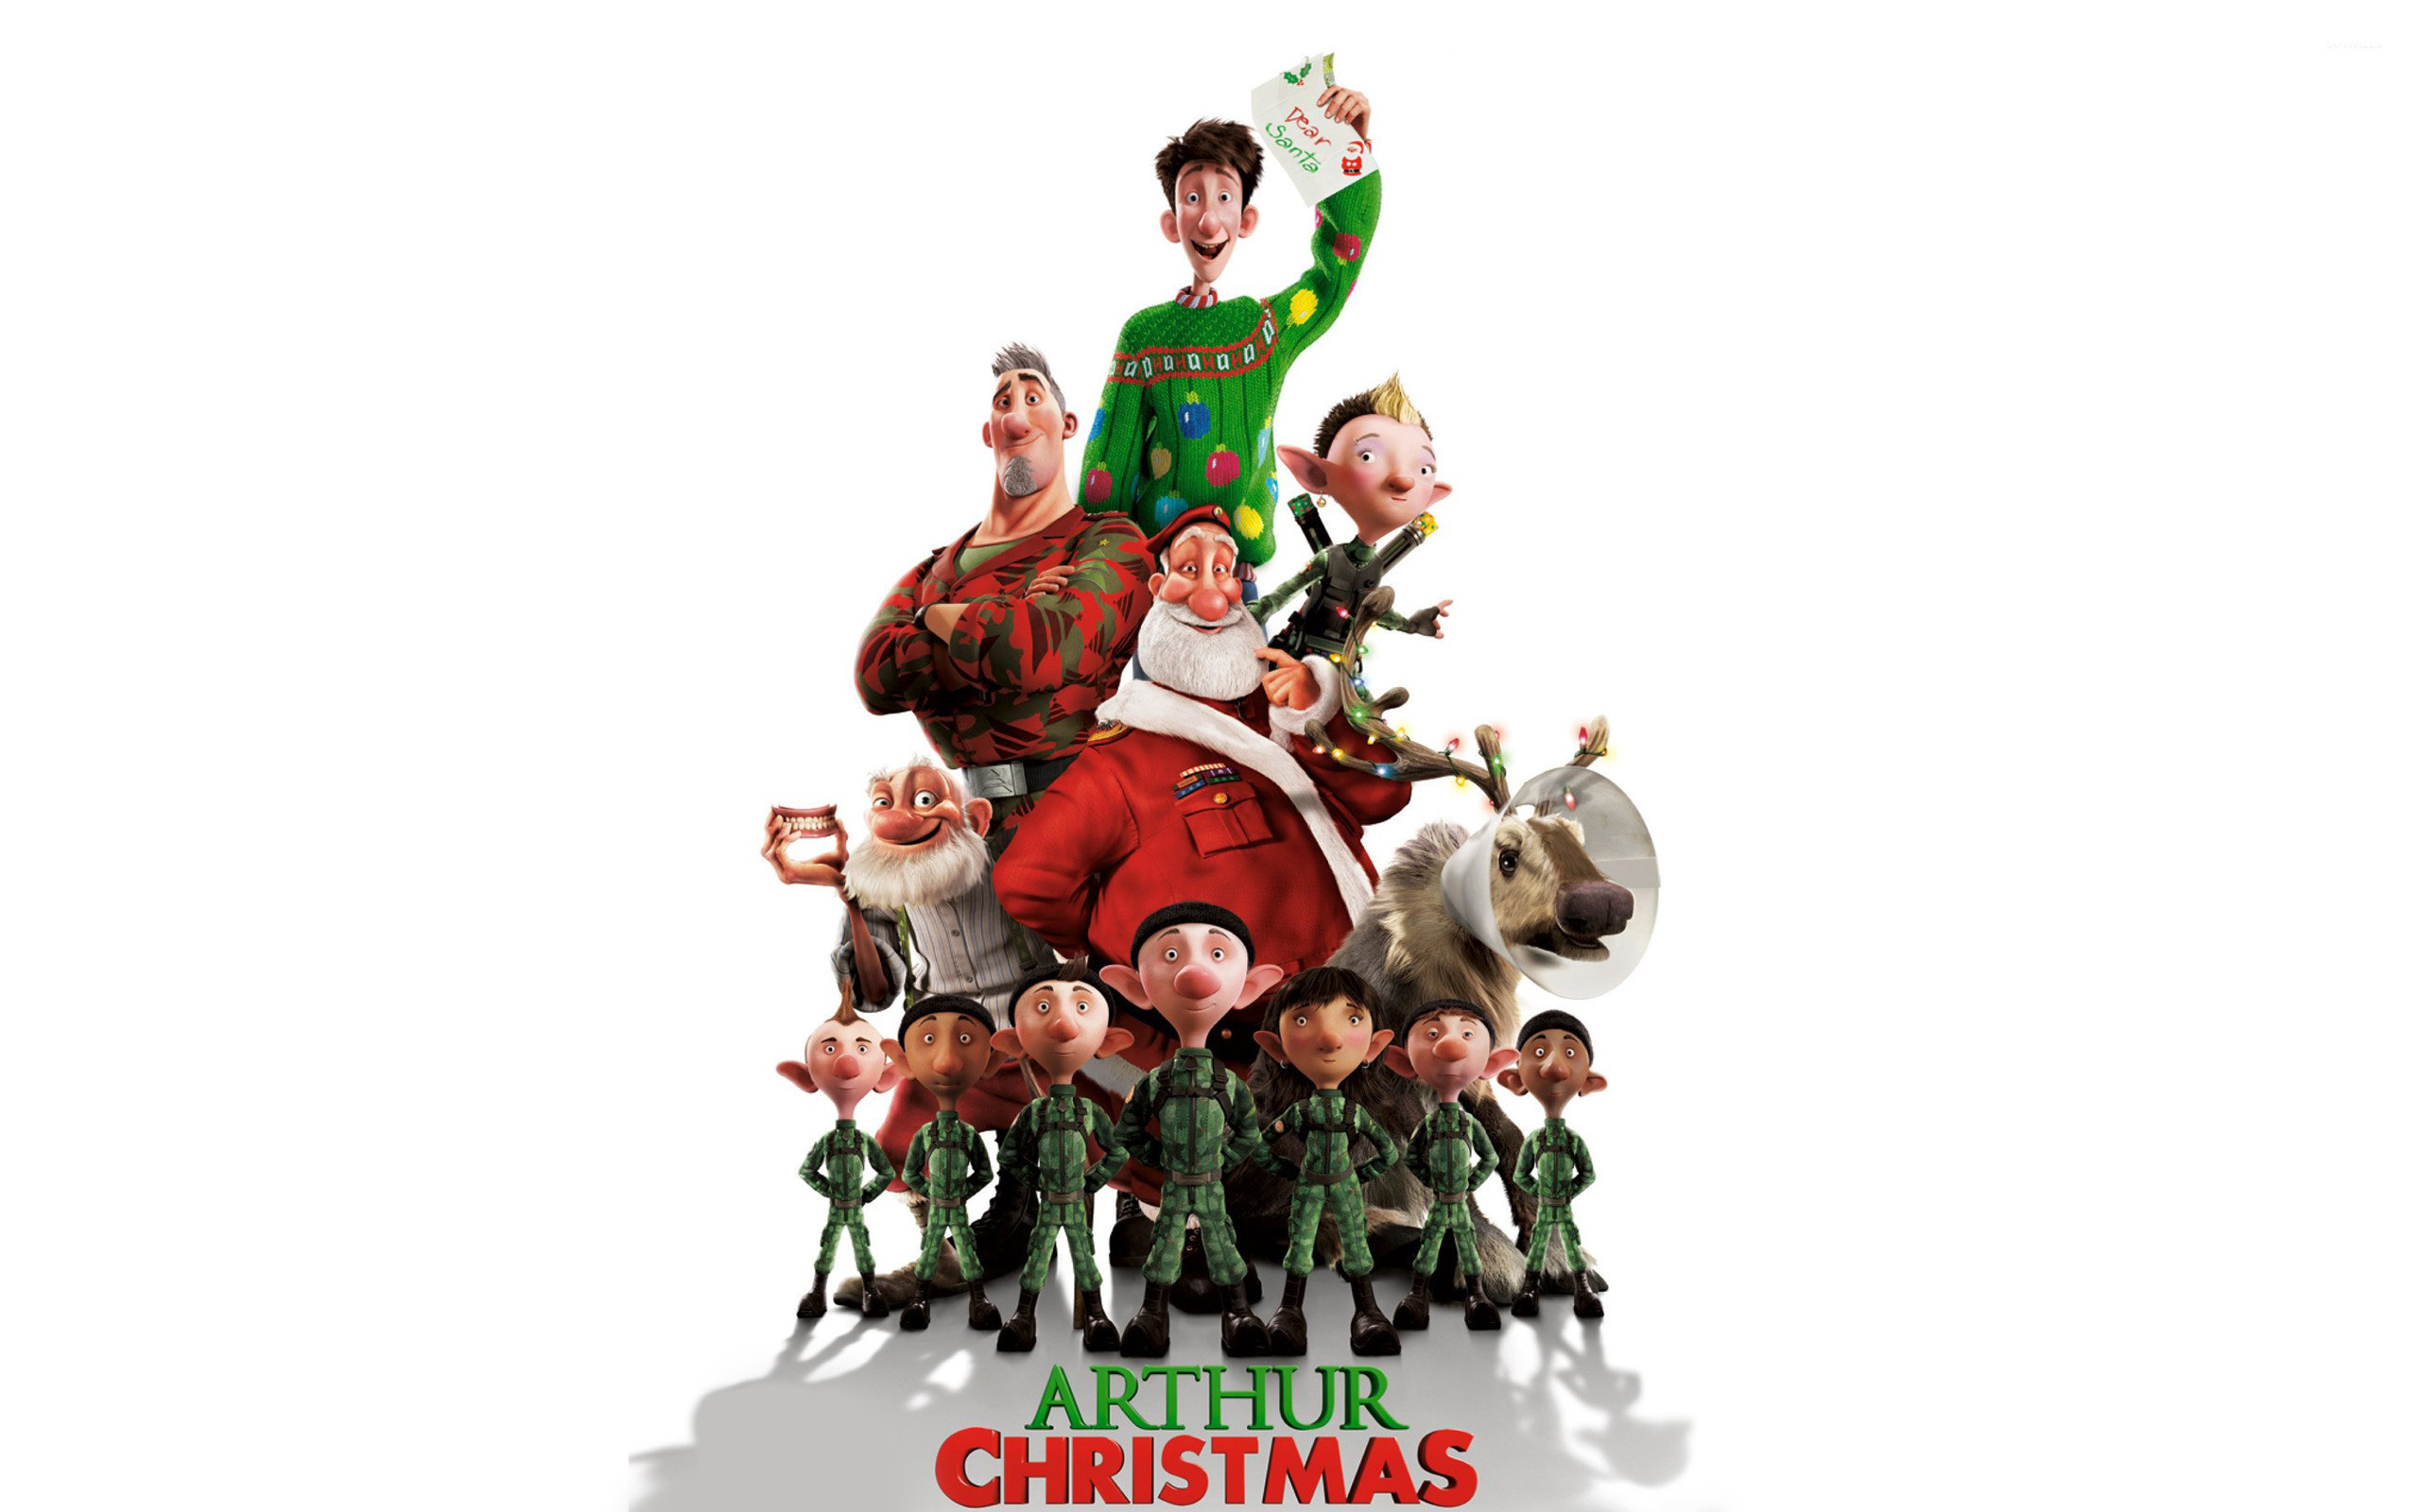 2560x1600 1920x1080 78+ images about :) How The Grinch Stole Christmas* on Pinterest